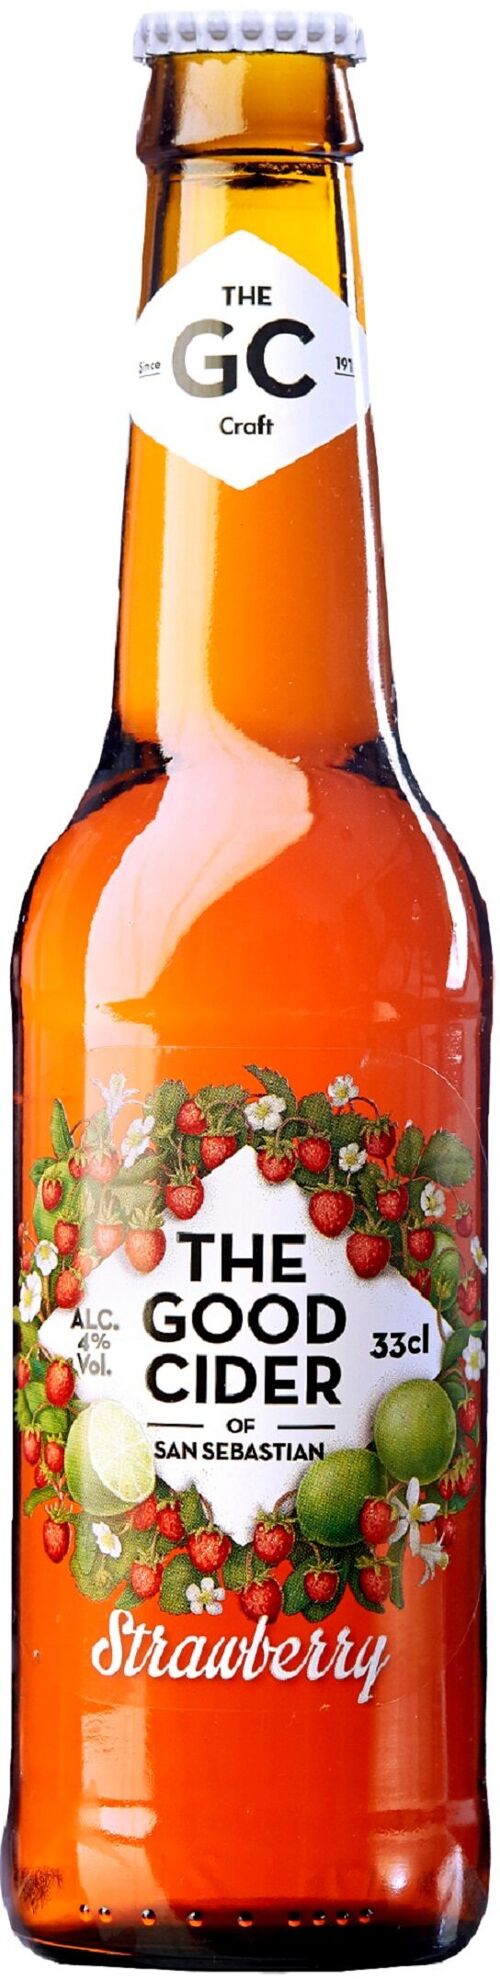 THE GOOD CIDER STRAWBERRY 33 CL CAJA 24 BOT